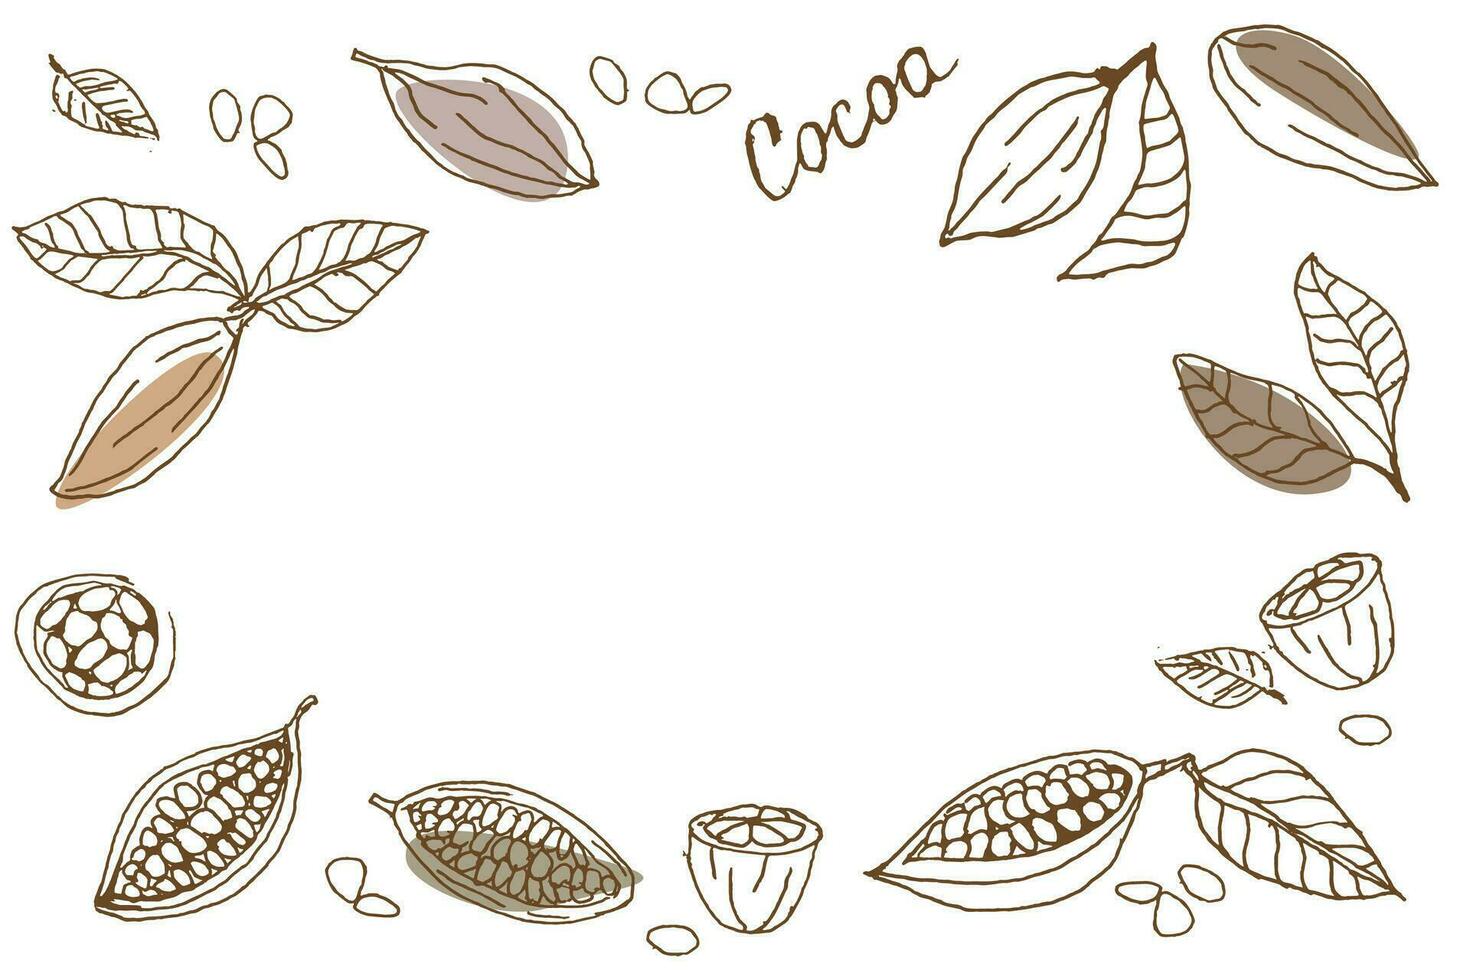 cocoa tree elements isolated on white background vector